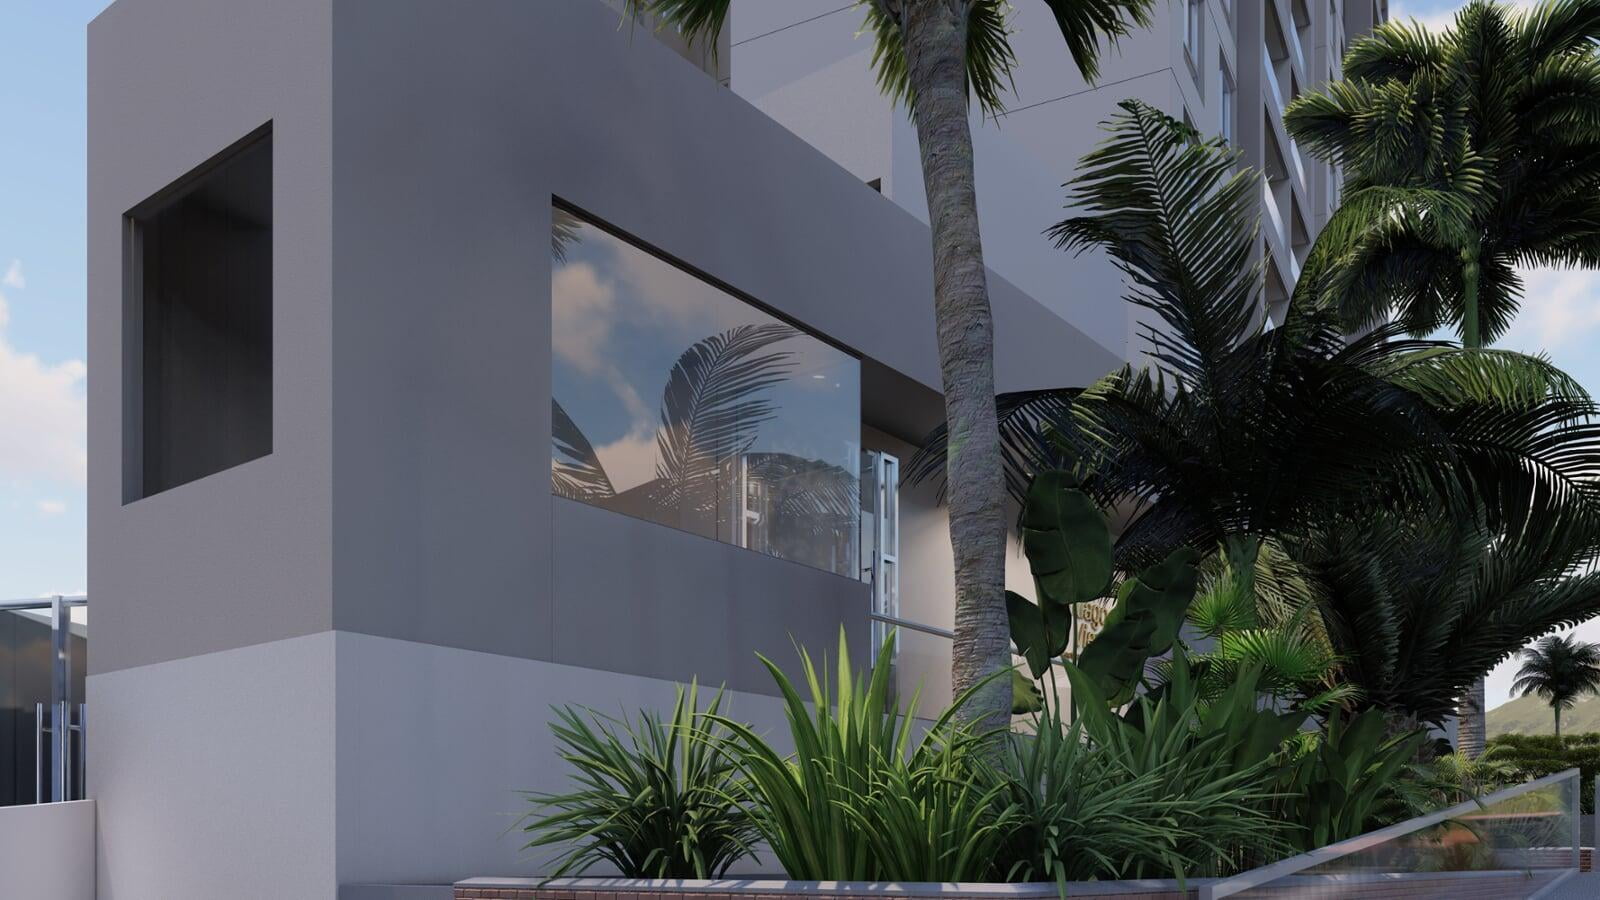 3D ARCHITECTURAL RENDERING AND VISUALIZATION.